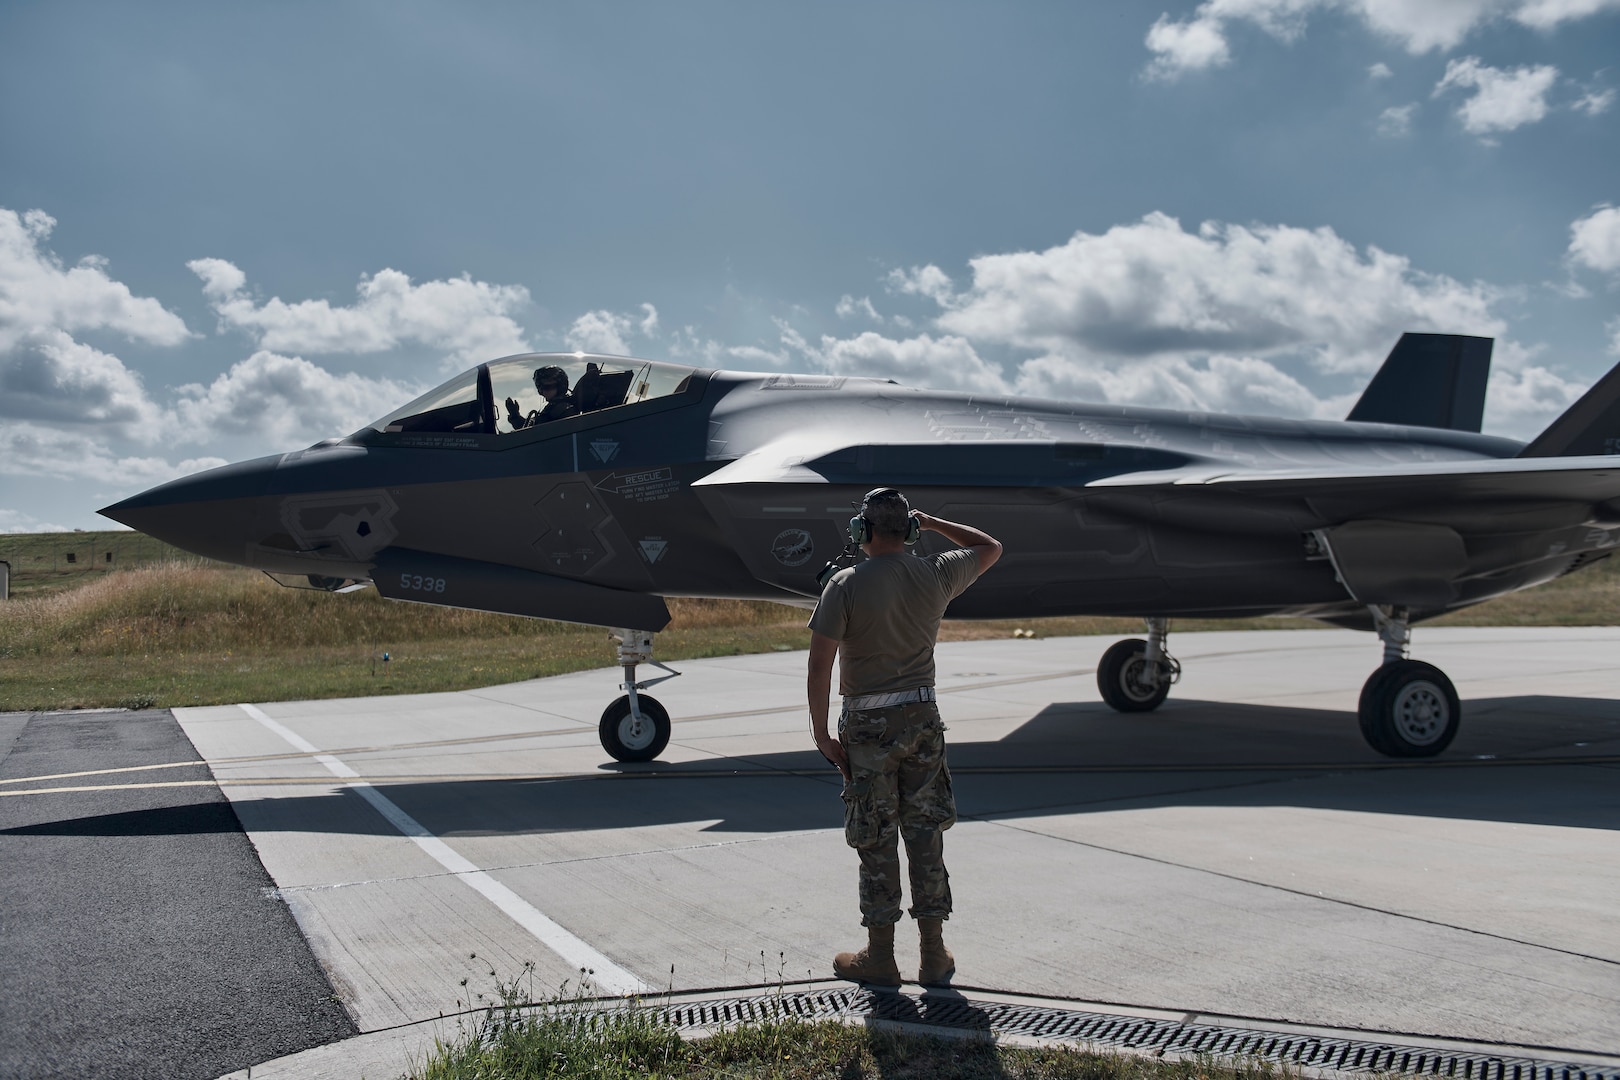 F-35A Lightning IIs assigned to the 134th Expeditionary Fighter Squadron, Vermont Air National Guard, prepare for takeoff for shield and assurance missions over Europe from Spangdahlem Air Base, Germany, June 21, 2022. Aircraft and Airmen from Vermont's 158th Fighter Wing deployed to Germany for more than three months as part of ongoing NATO efforts in Europe.